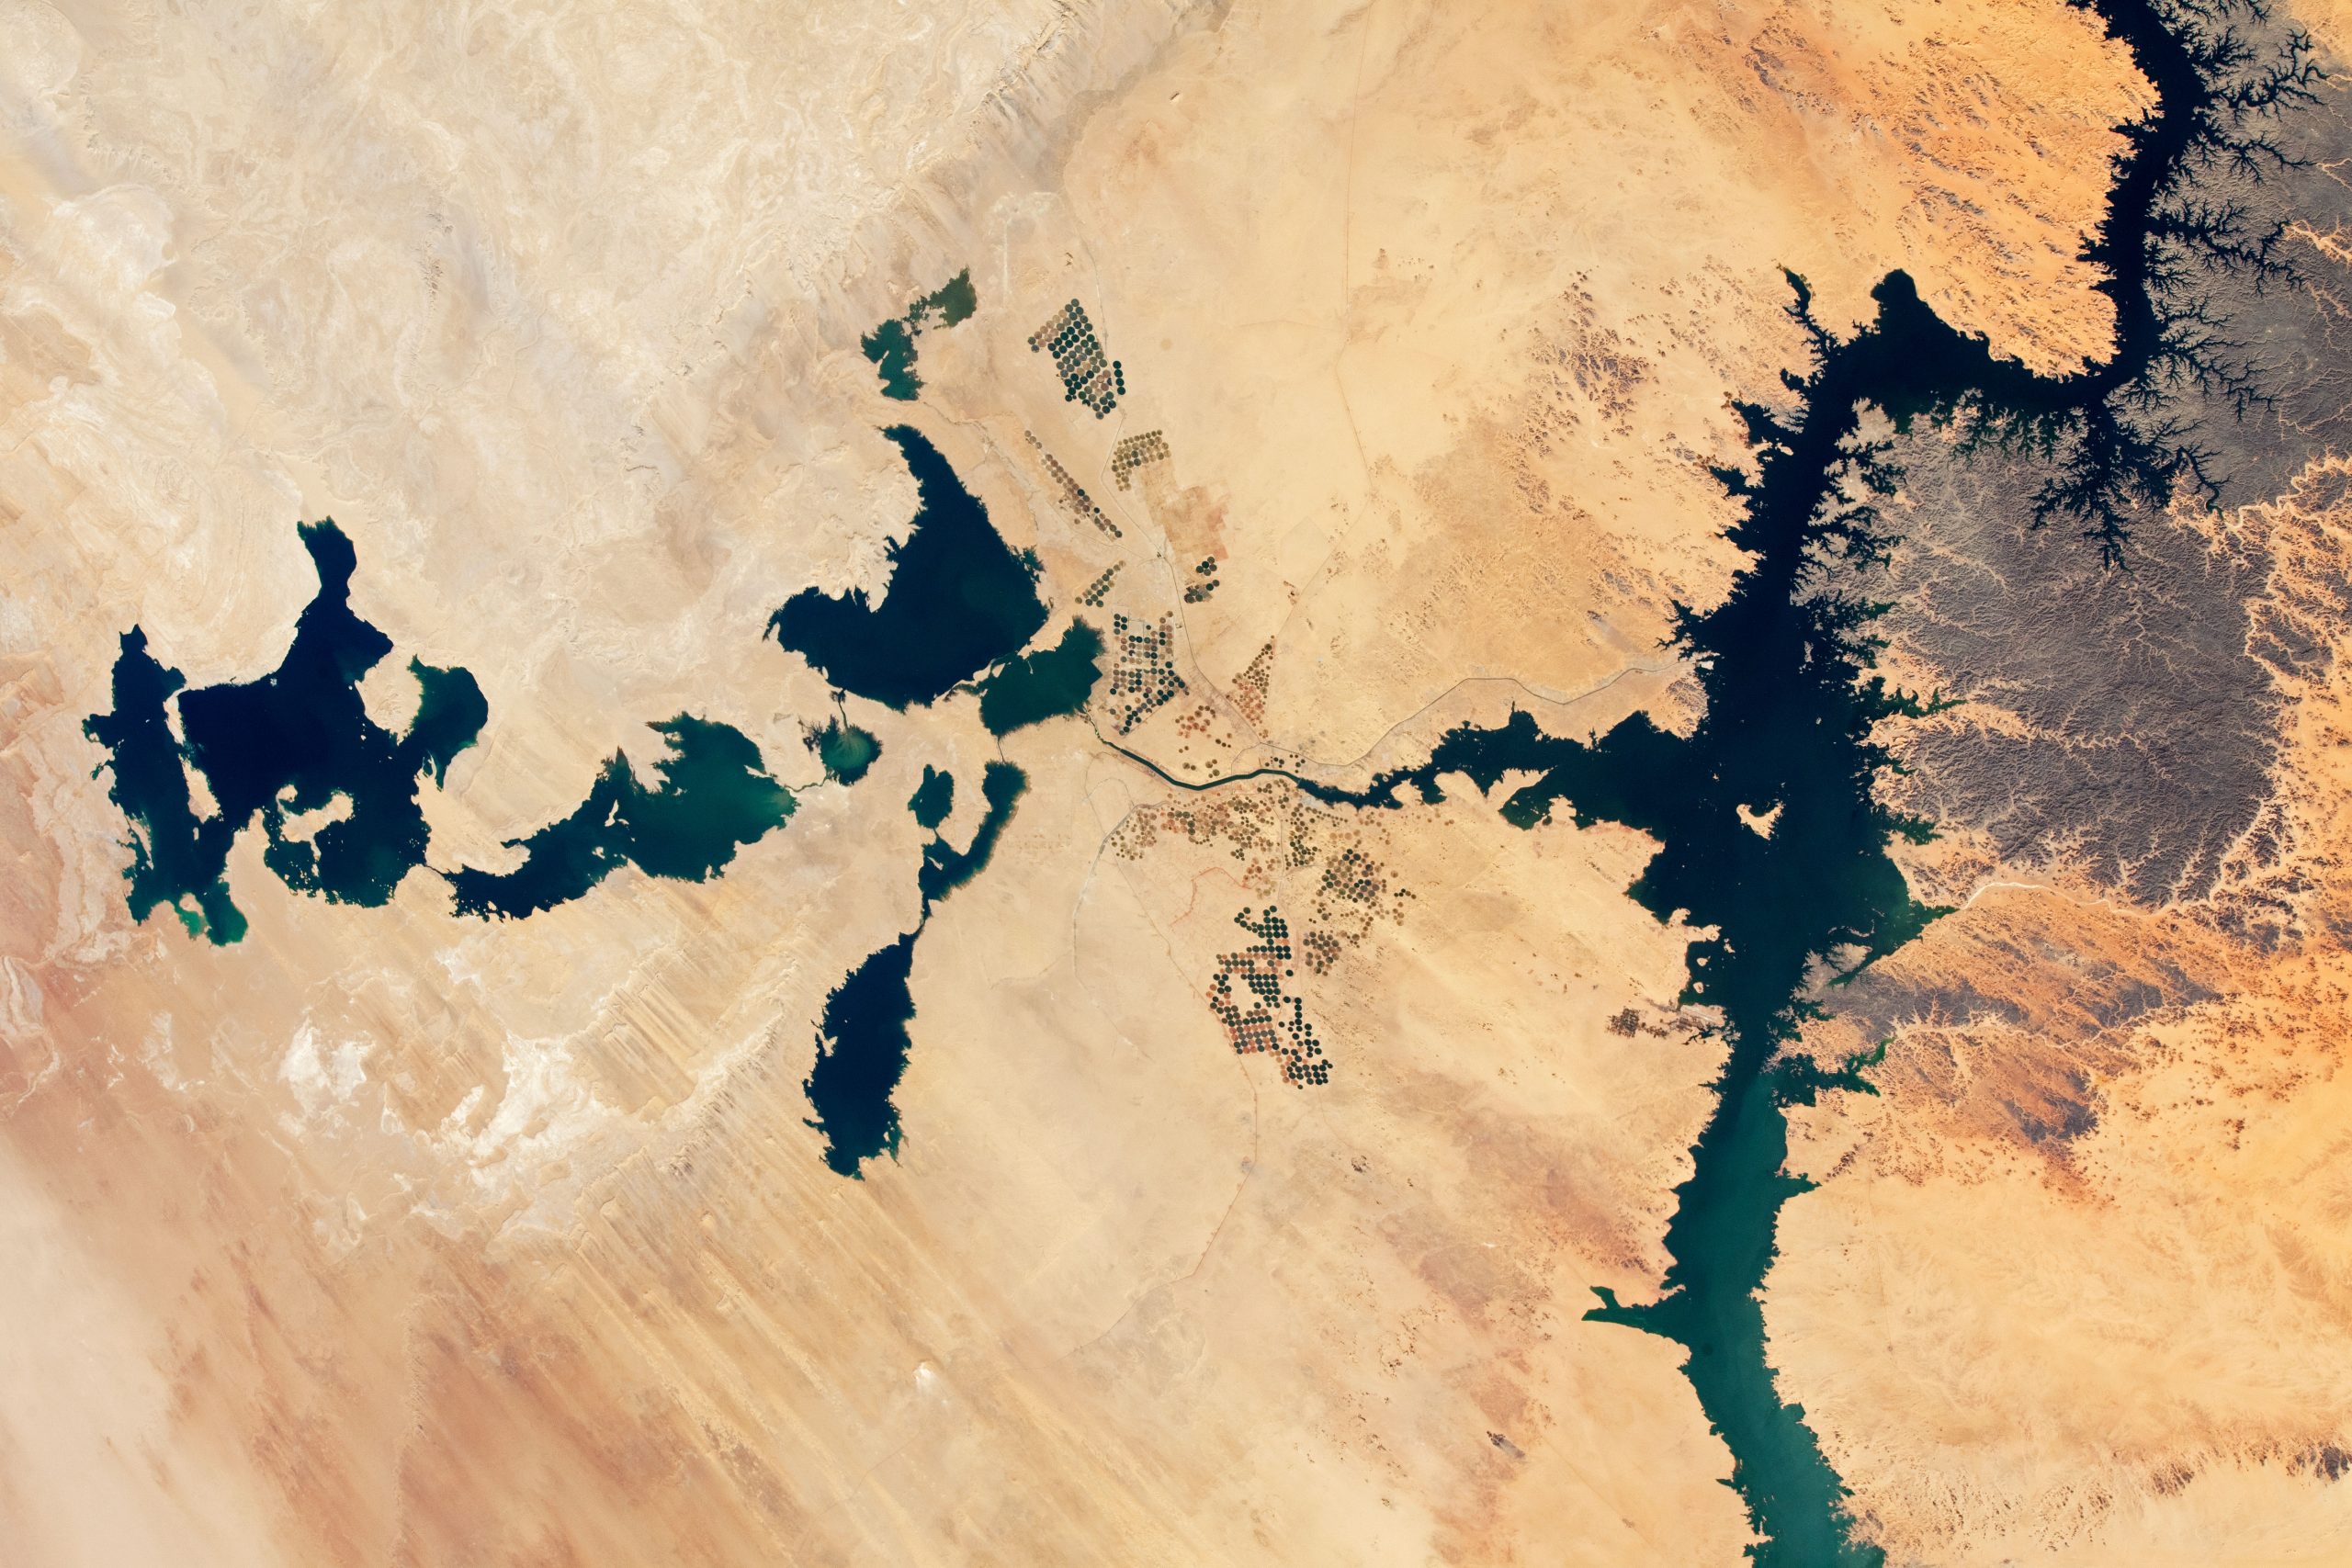 Satellite images of artificial lakes in the Egyptian desert. Image Credit: NASA Earth Observatory.